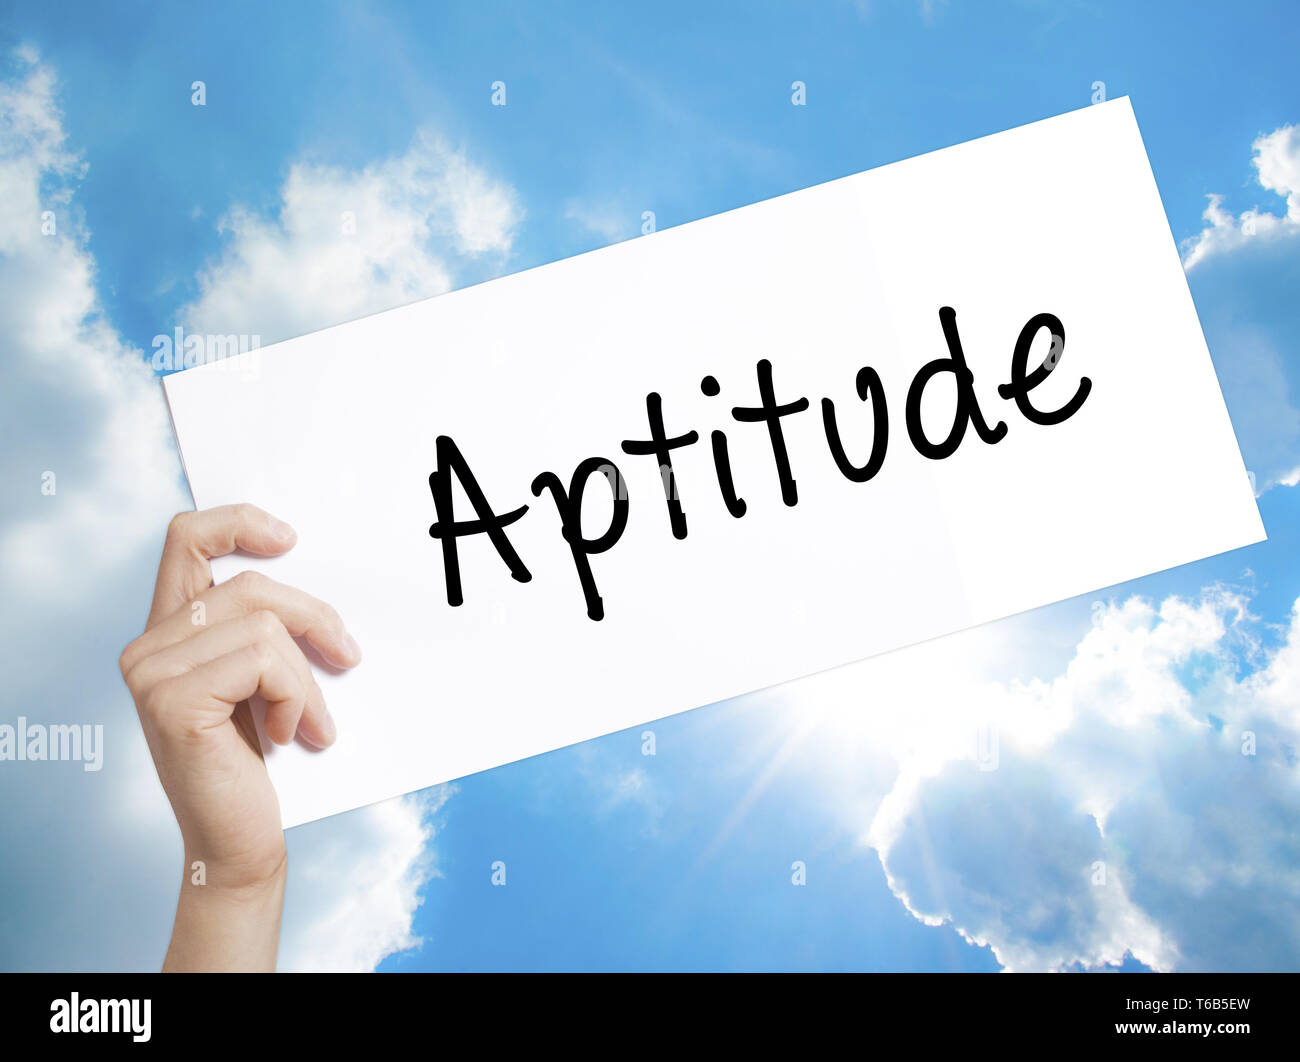 Aptitude Sign on white paper. Man Hand Holding Paper with text. Isolated on sky background Stock Photo